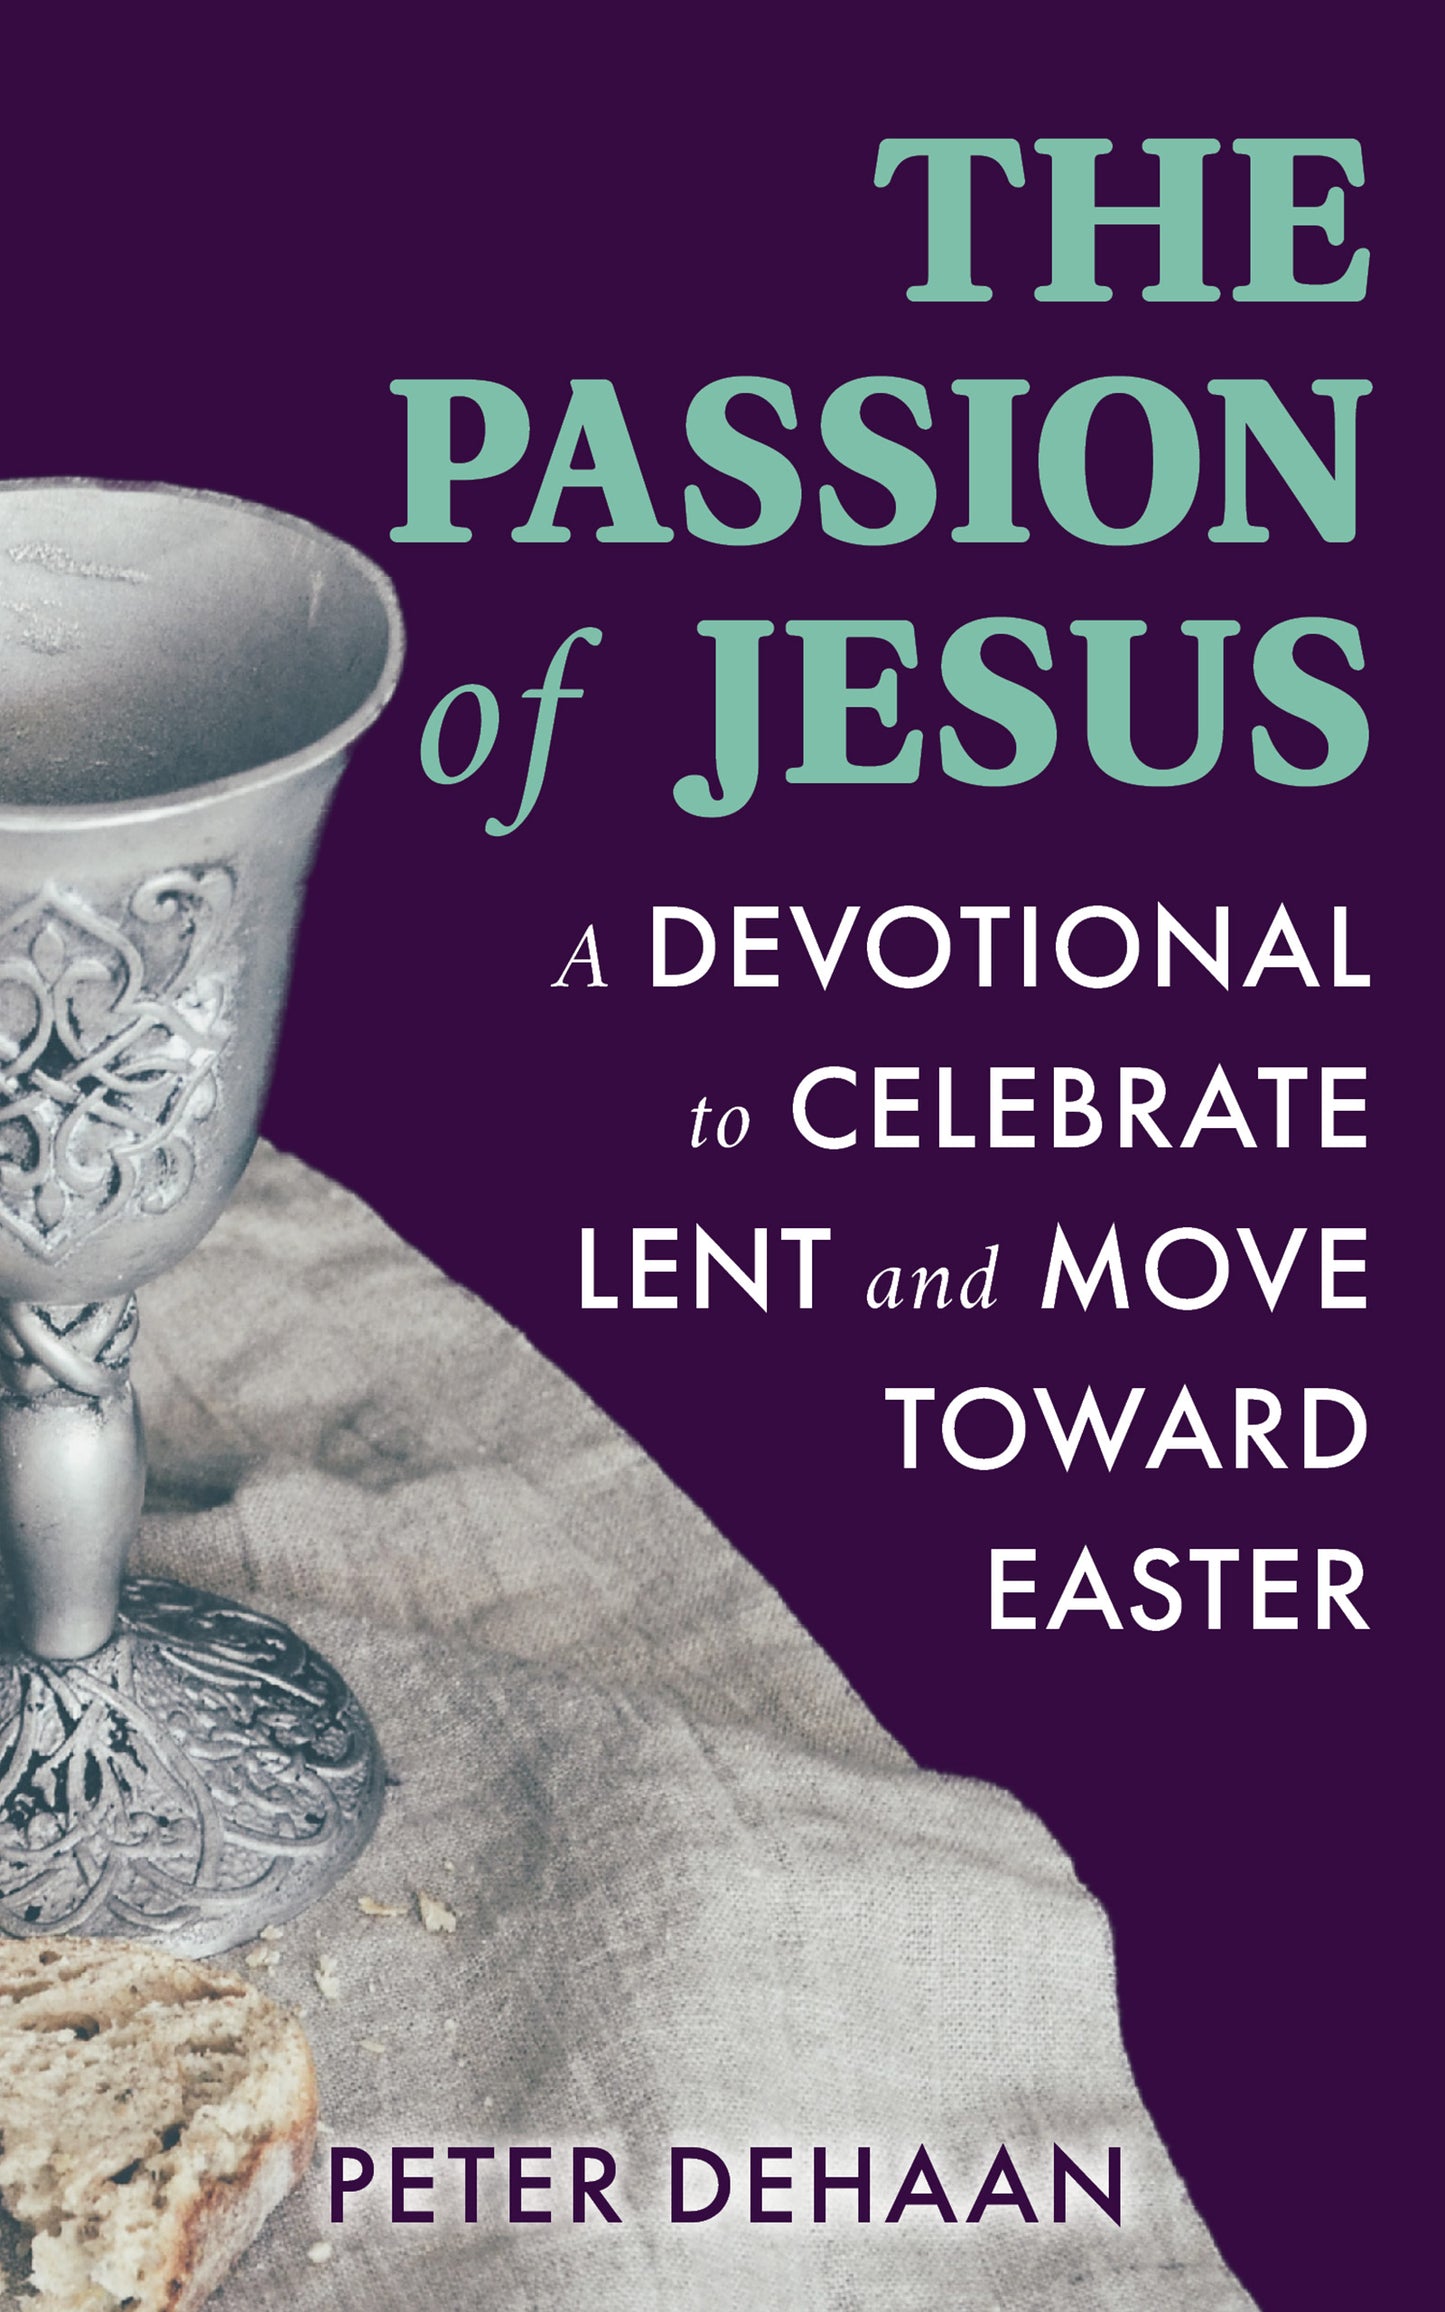 The Passion of Jesus: A Devotional to Celebrate Lent and Move Toward Easter (ebook)